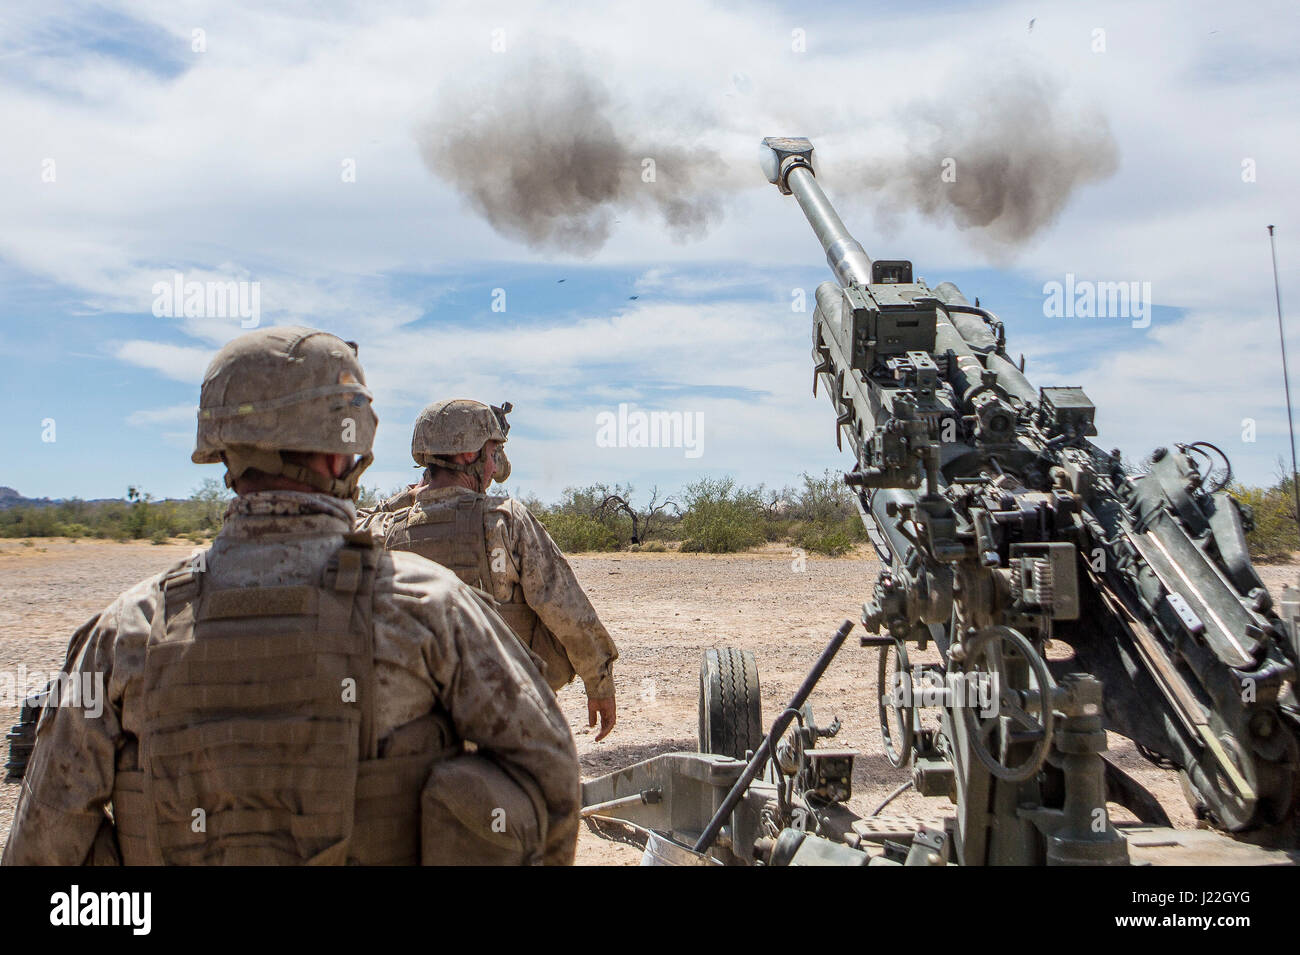 U.S. Marines with Battery B, 1st Batalion, 10th Marine Regiment, fire a M777 towed 155 mm howitzer during assault support tactics 1 (AST-1) in support of Weapons and Tactics Instructor course (WTI) 2-17 at Fire Base Burt, Calif., April 17, 2017. AST-1 is a battalion reinforced air assault exercise, supported by fixed wing and rotary wing aviation fires, aviation delivered artillery, and mortars. WTI is a seven-week training event hosted by Marine Aviation Weapons and Tactics Squadron One (MAWTS-1) cadre, which emphasizes operational integration of the six functions of Marine Corps aviation in  Stock Photo